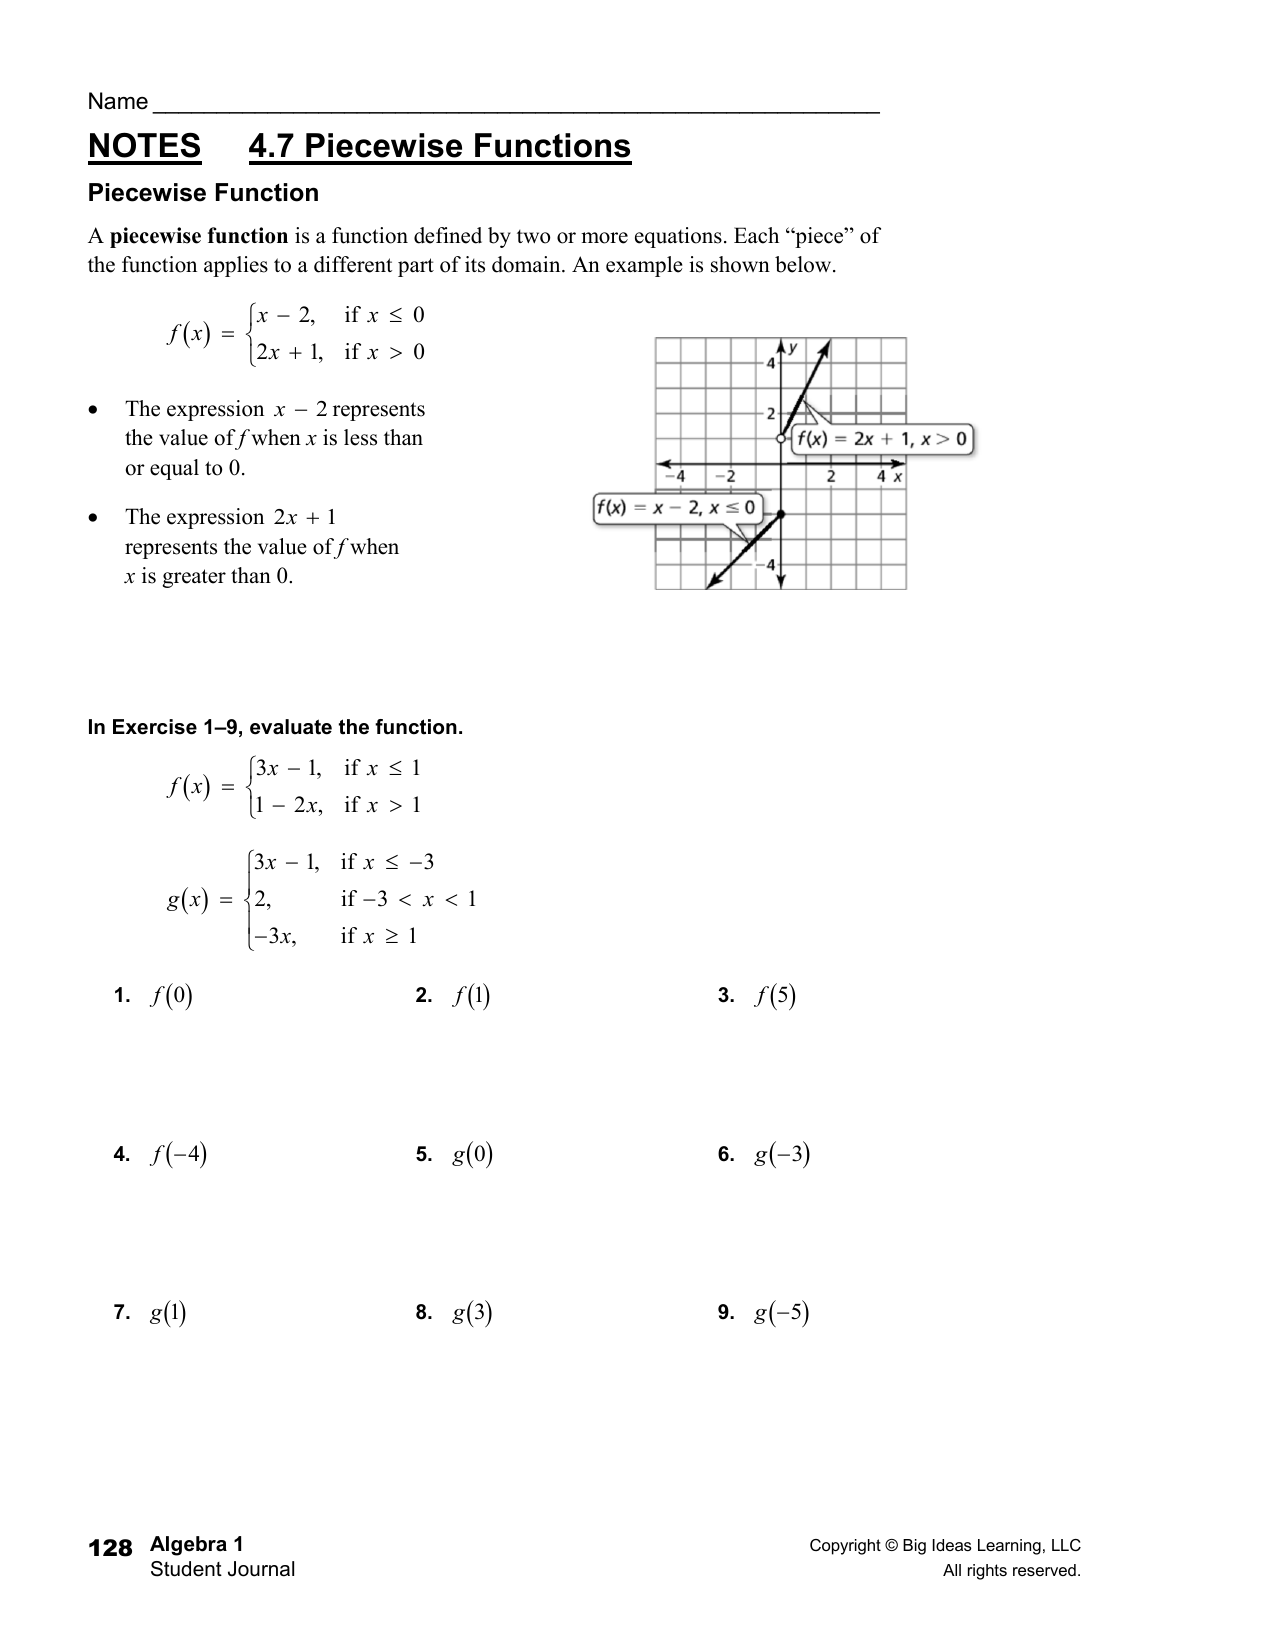 homework 3 equations as functions answer key